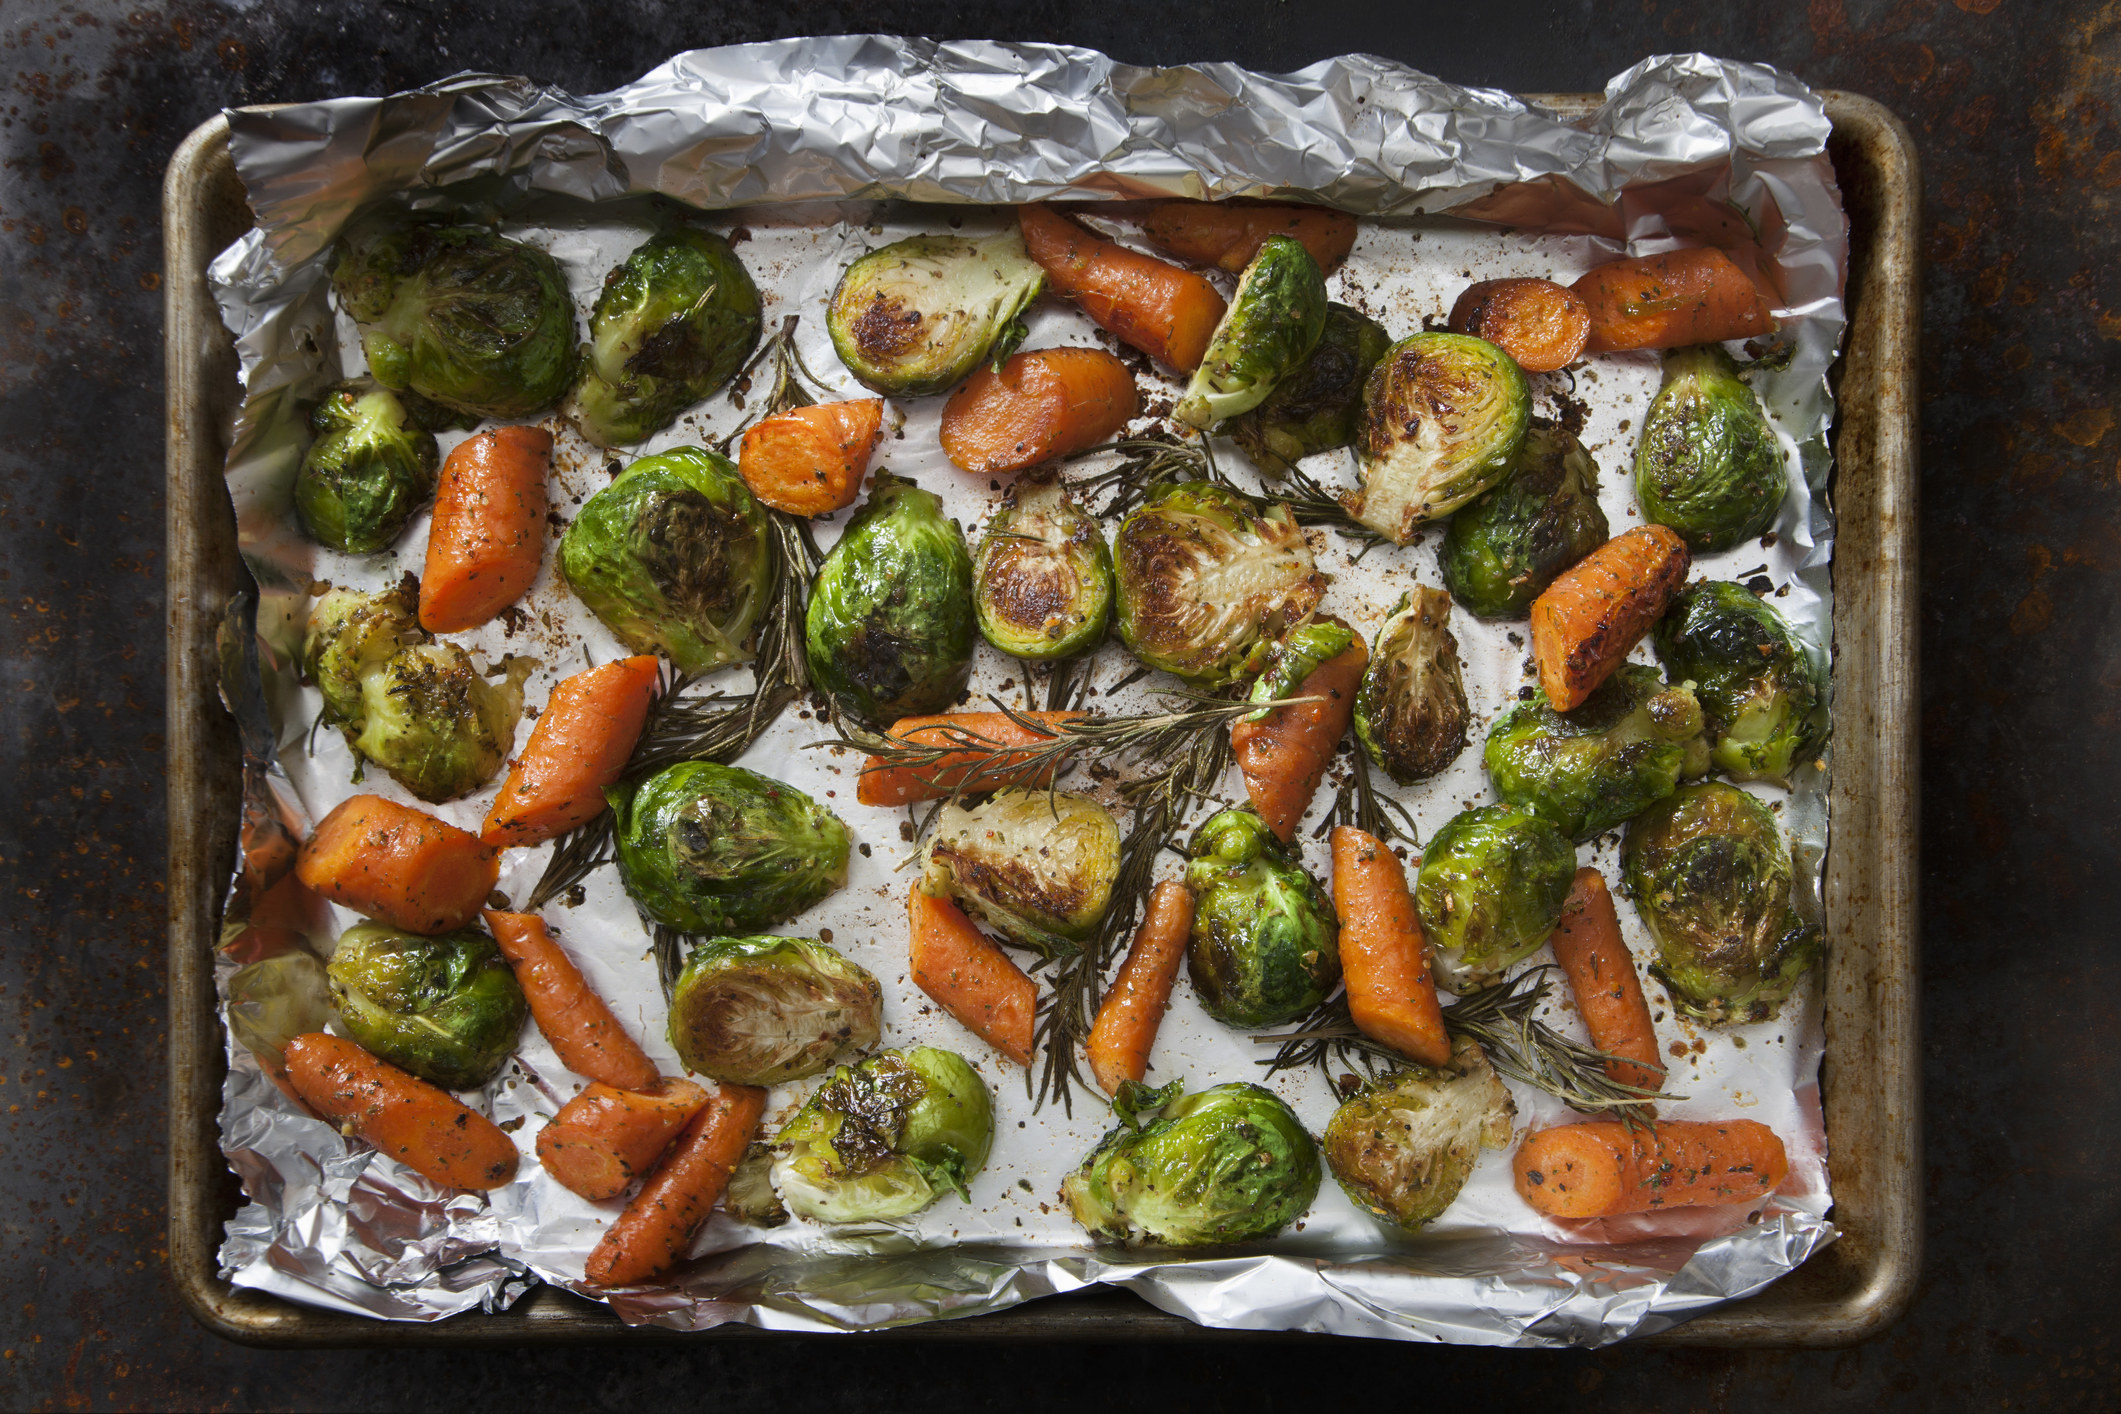 Roasted Brussels sprouts and carrots on a baking sheet.